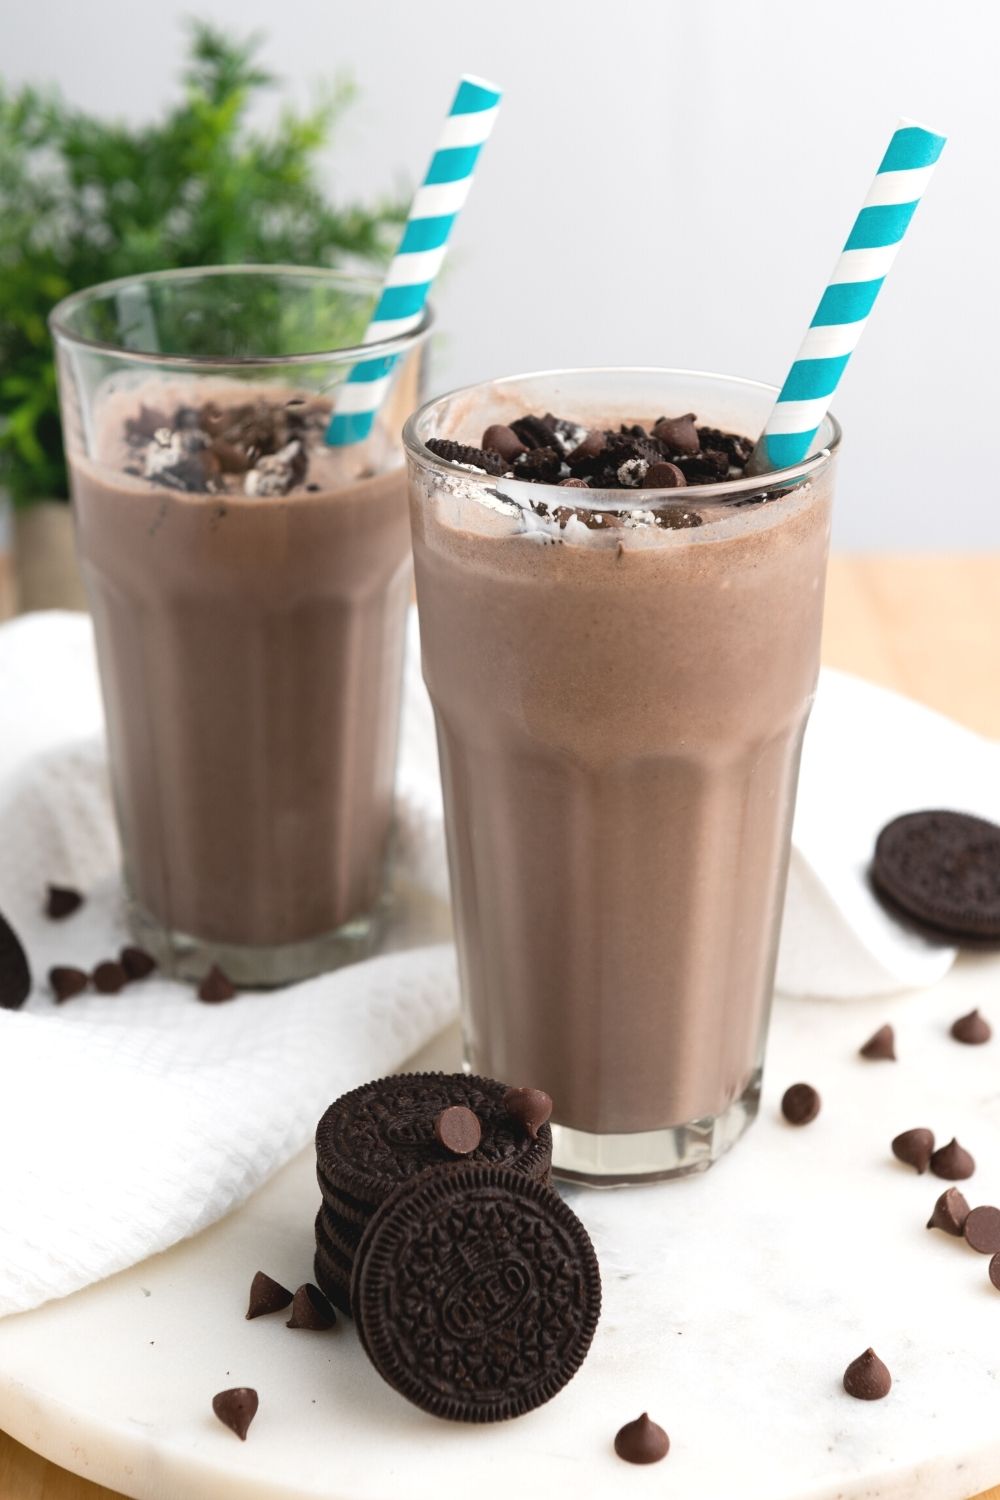 two glasses of Oreo milkshakes made without ice cream, with chocolate chips and Oreo cookies scattered around the glasses